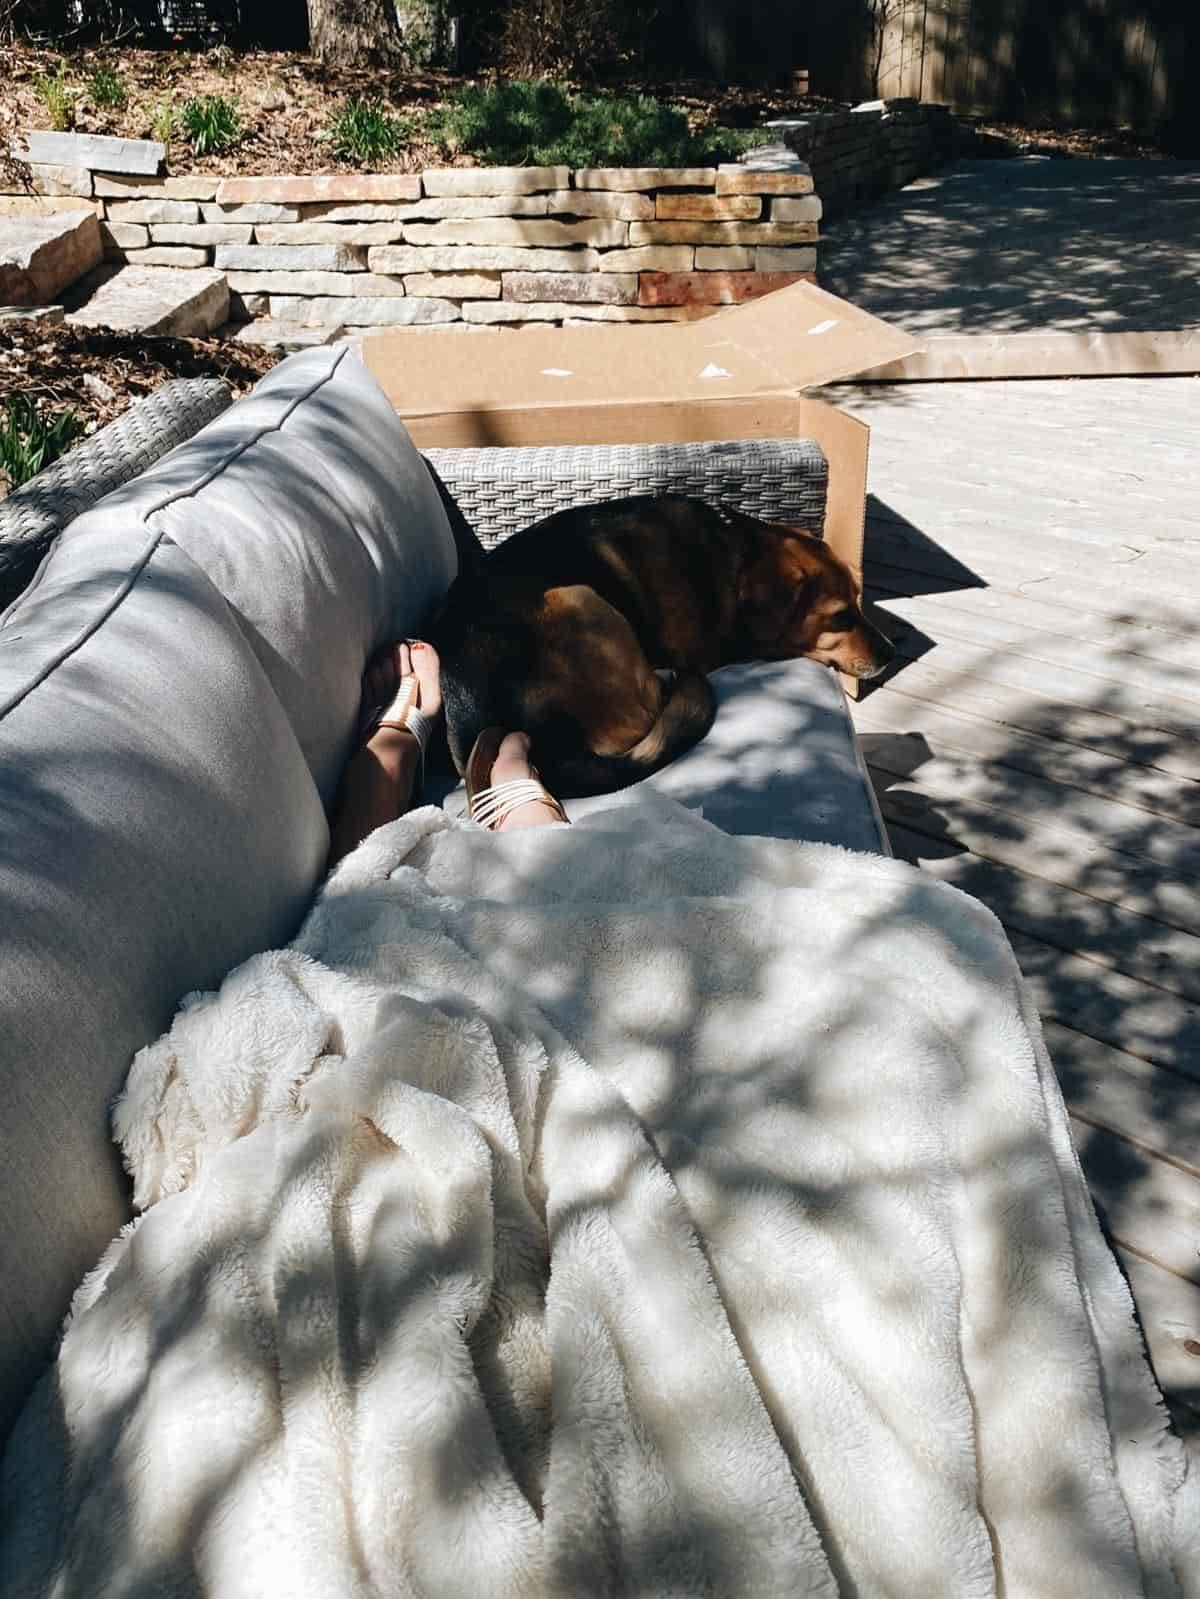 A person taking a photo of their legs in a blanket and a dog curled up at their feet on a couch.